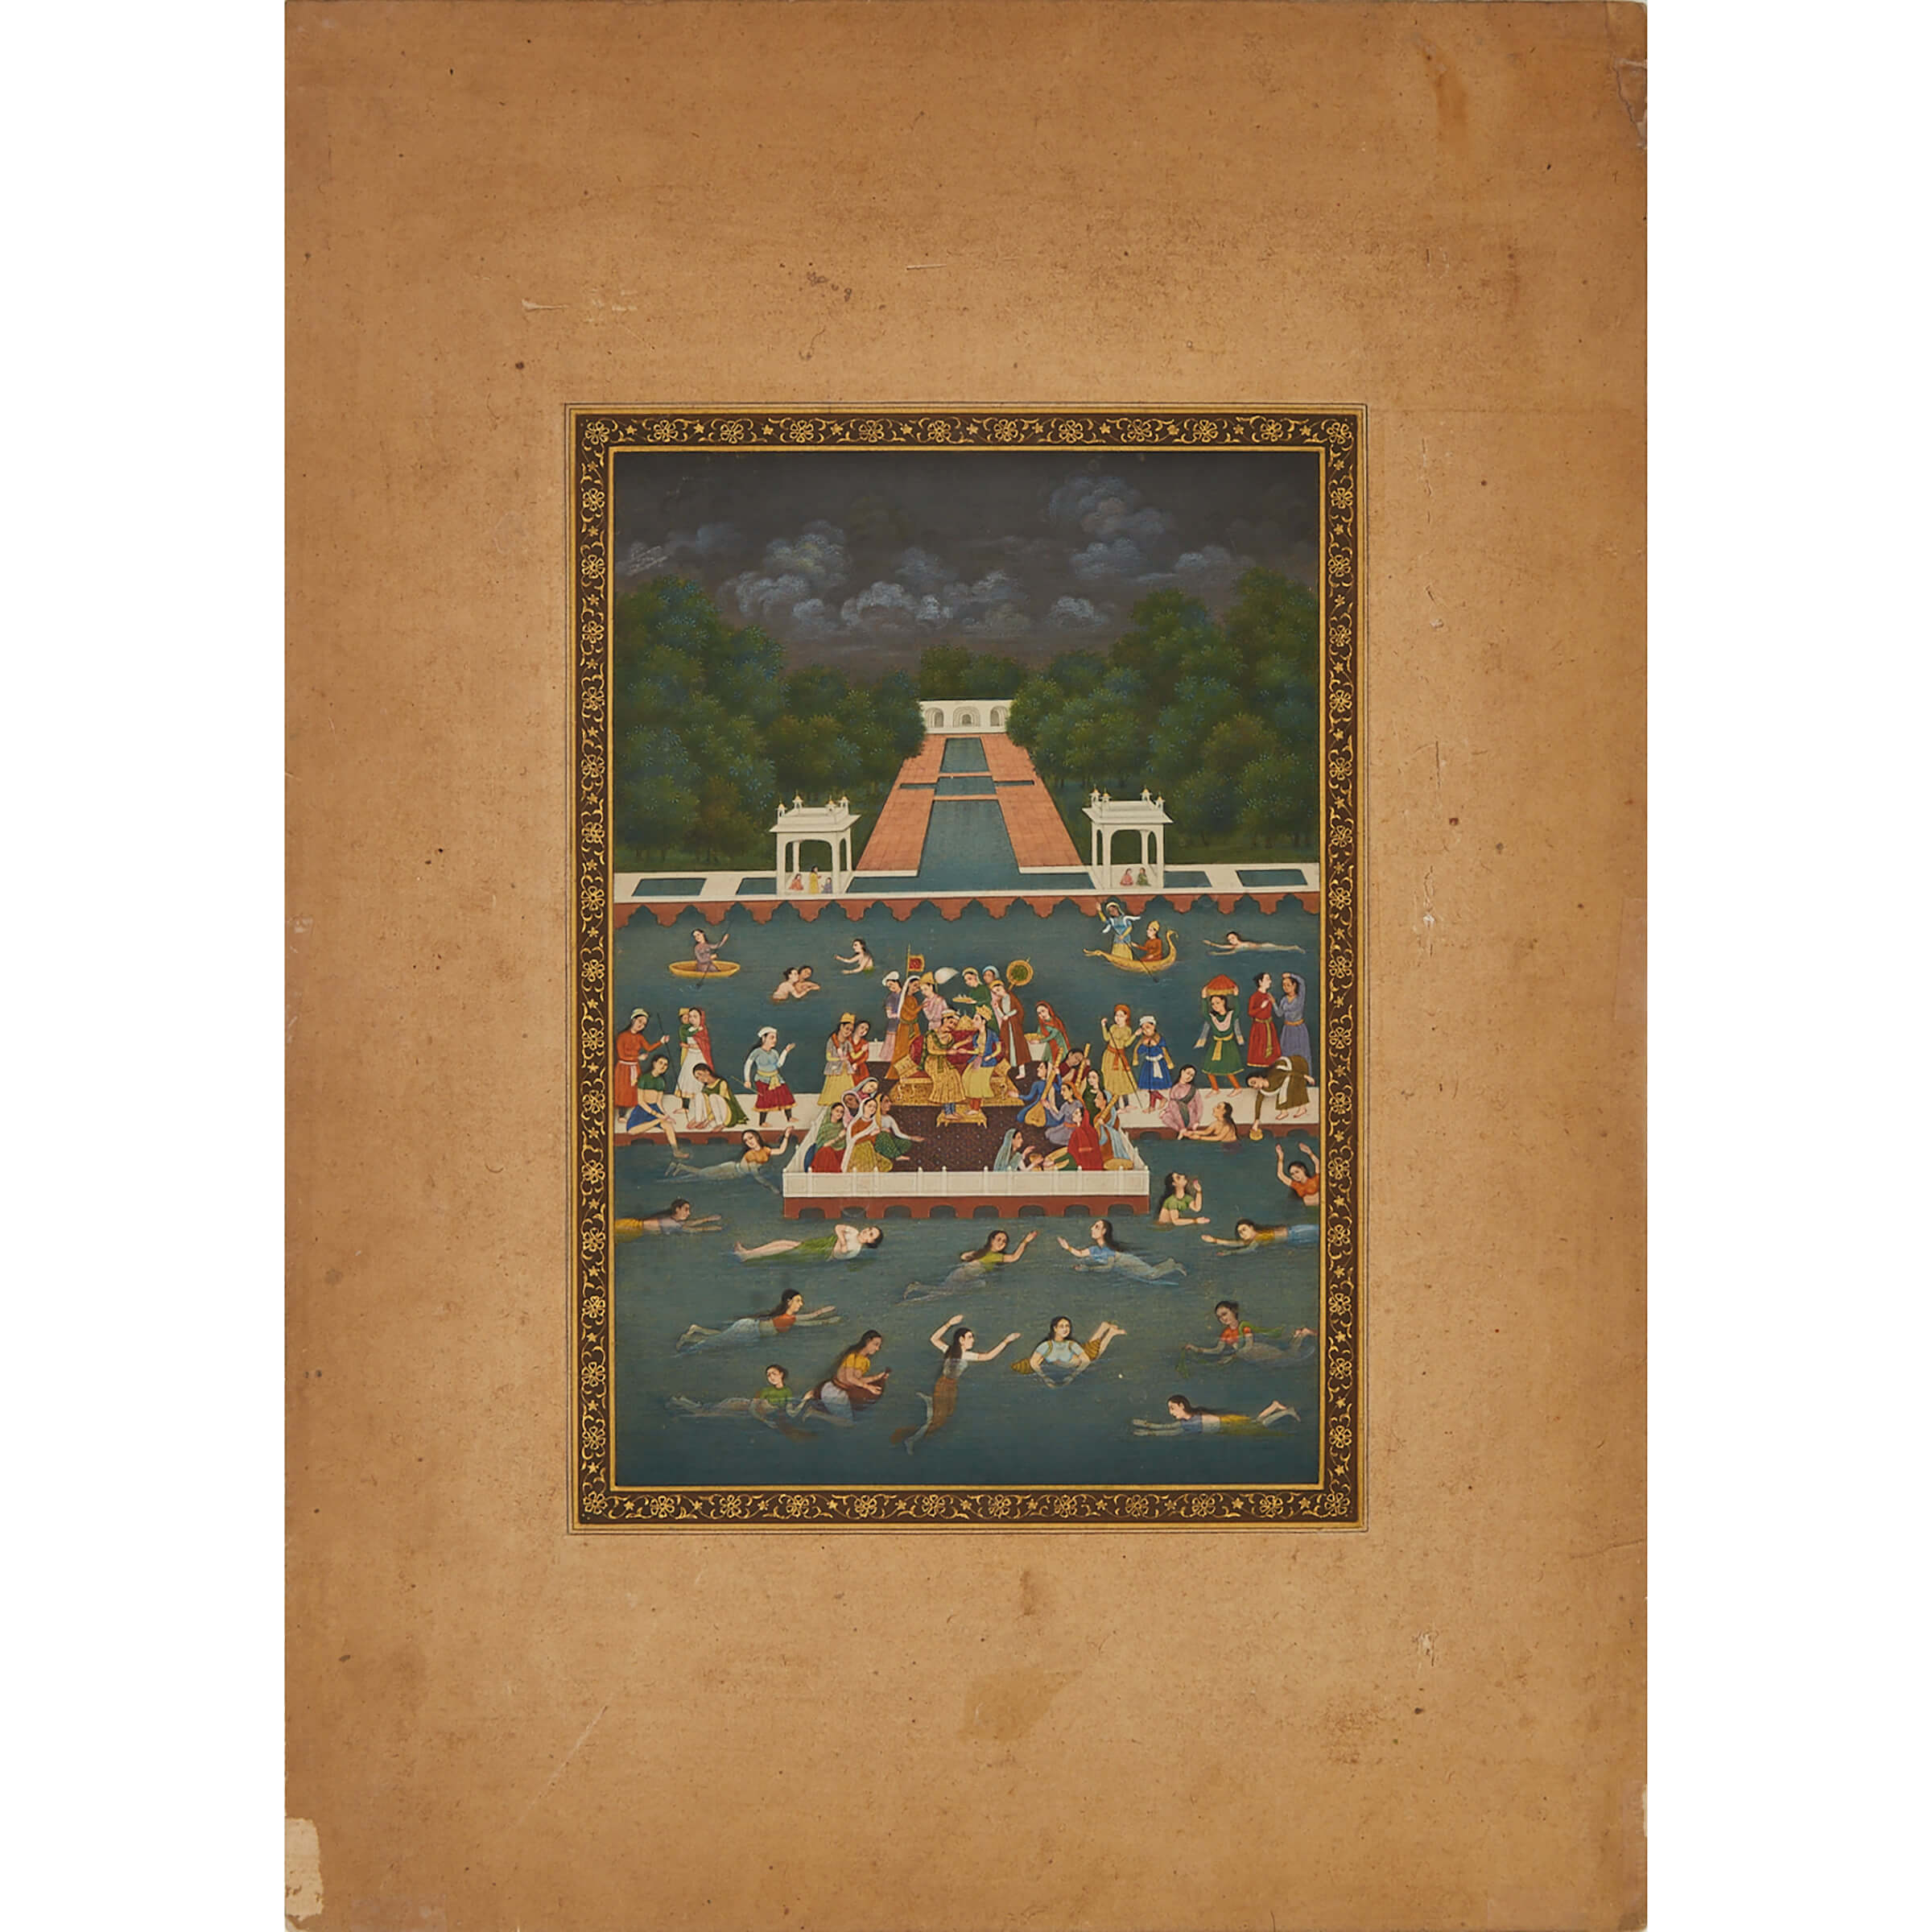 Mughal School, Emperor Jahangir Surrounded by Bathing Ladies, 18th Century